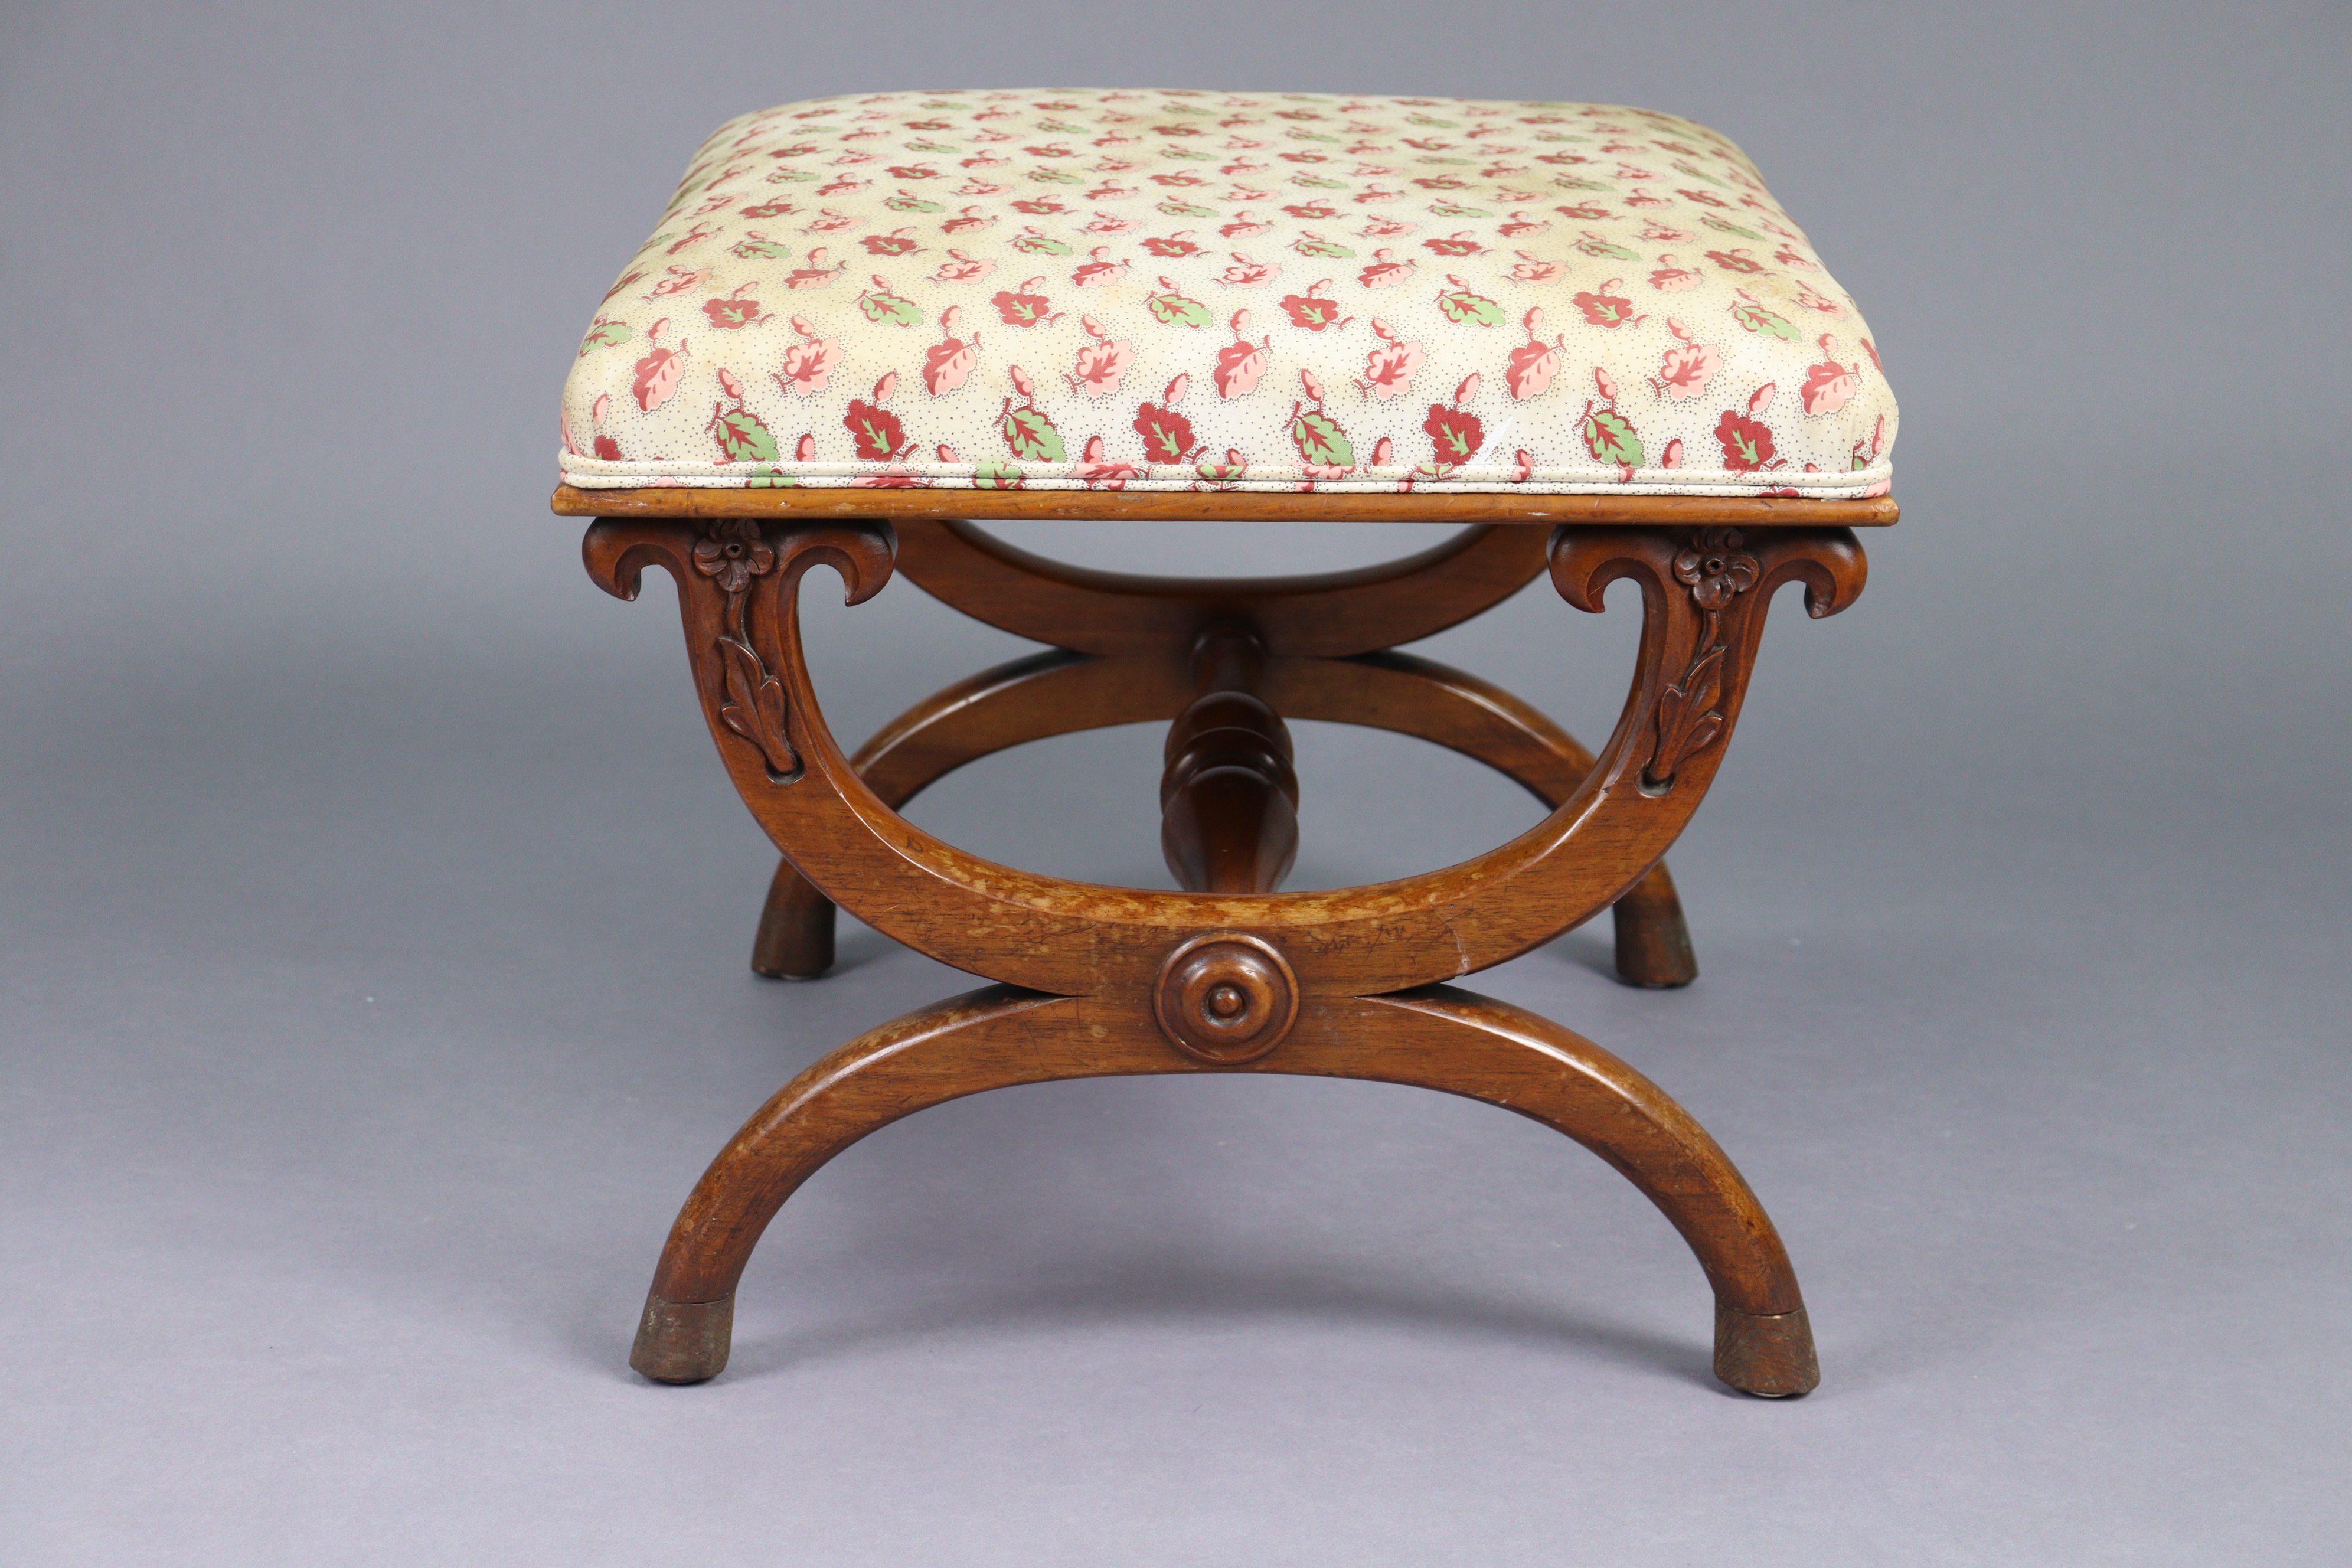 An early 19th century mahogany stool with padded rectangular seat upholstered cream leaf & - Image 3 of 4